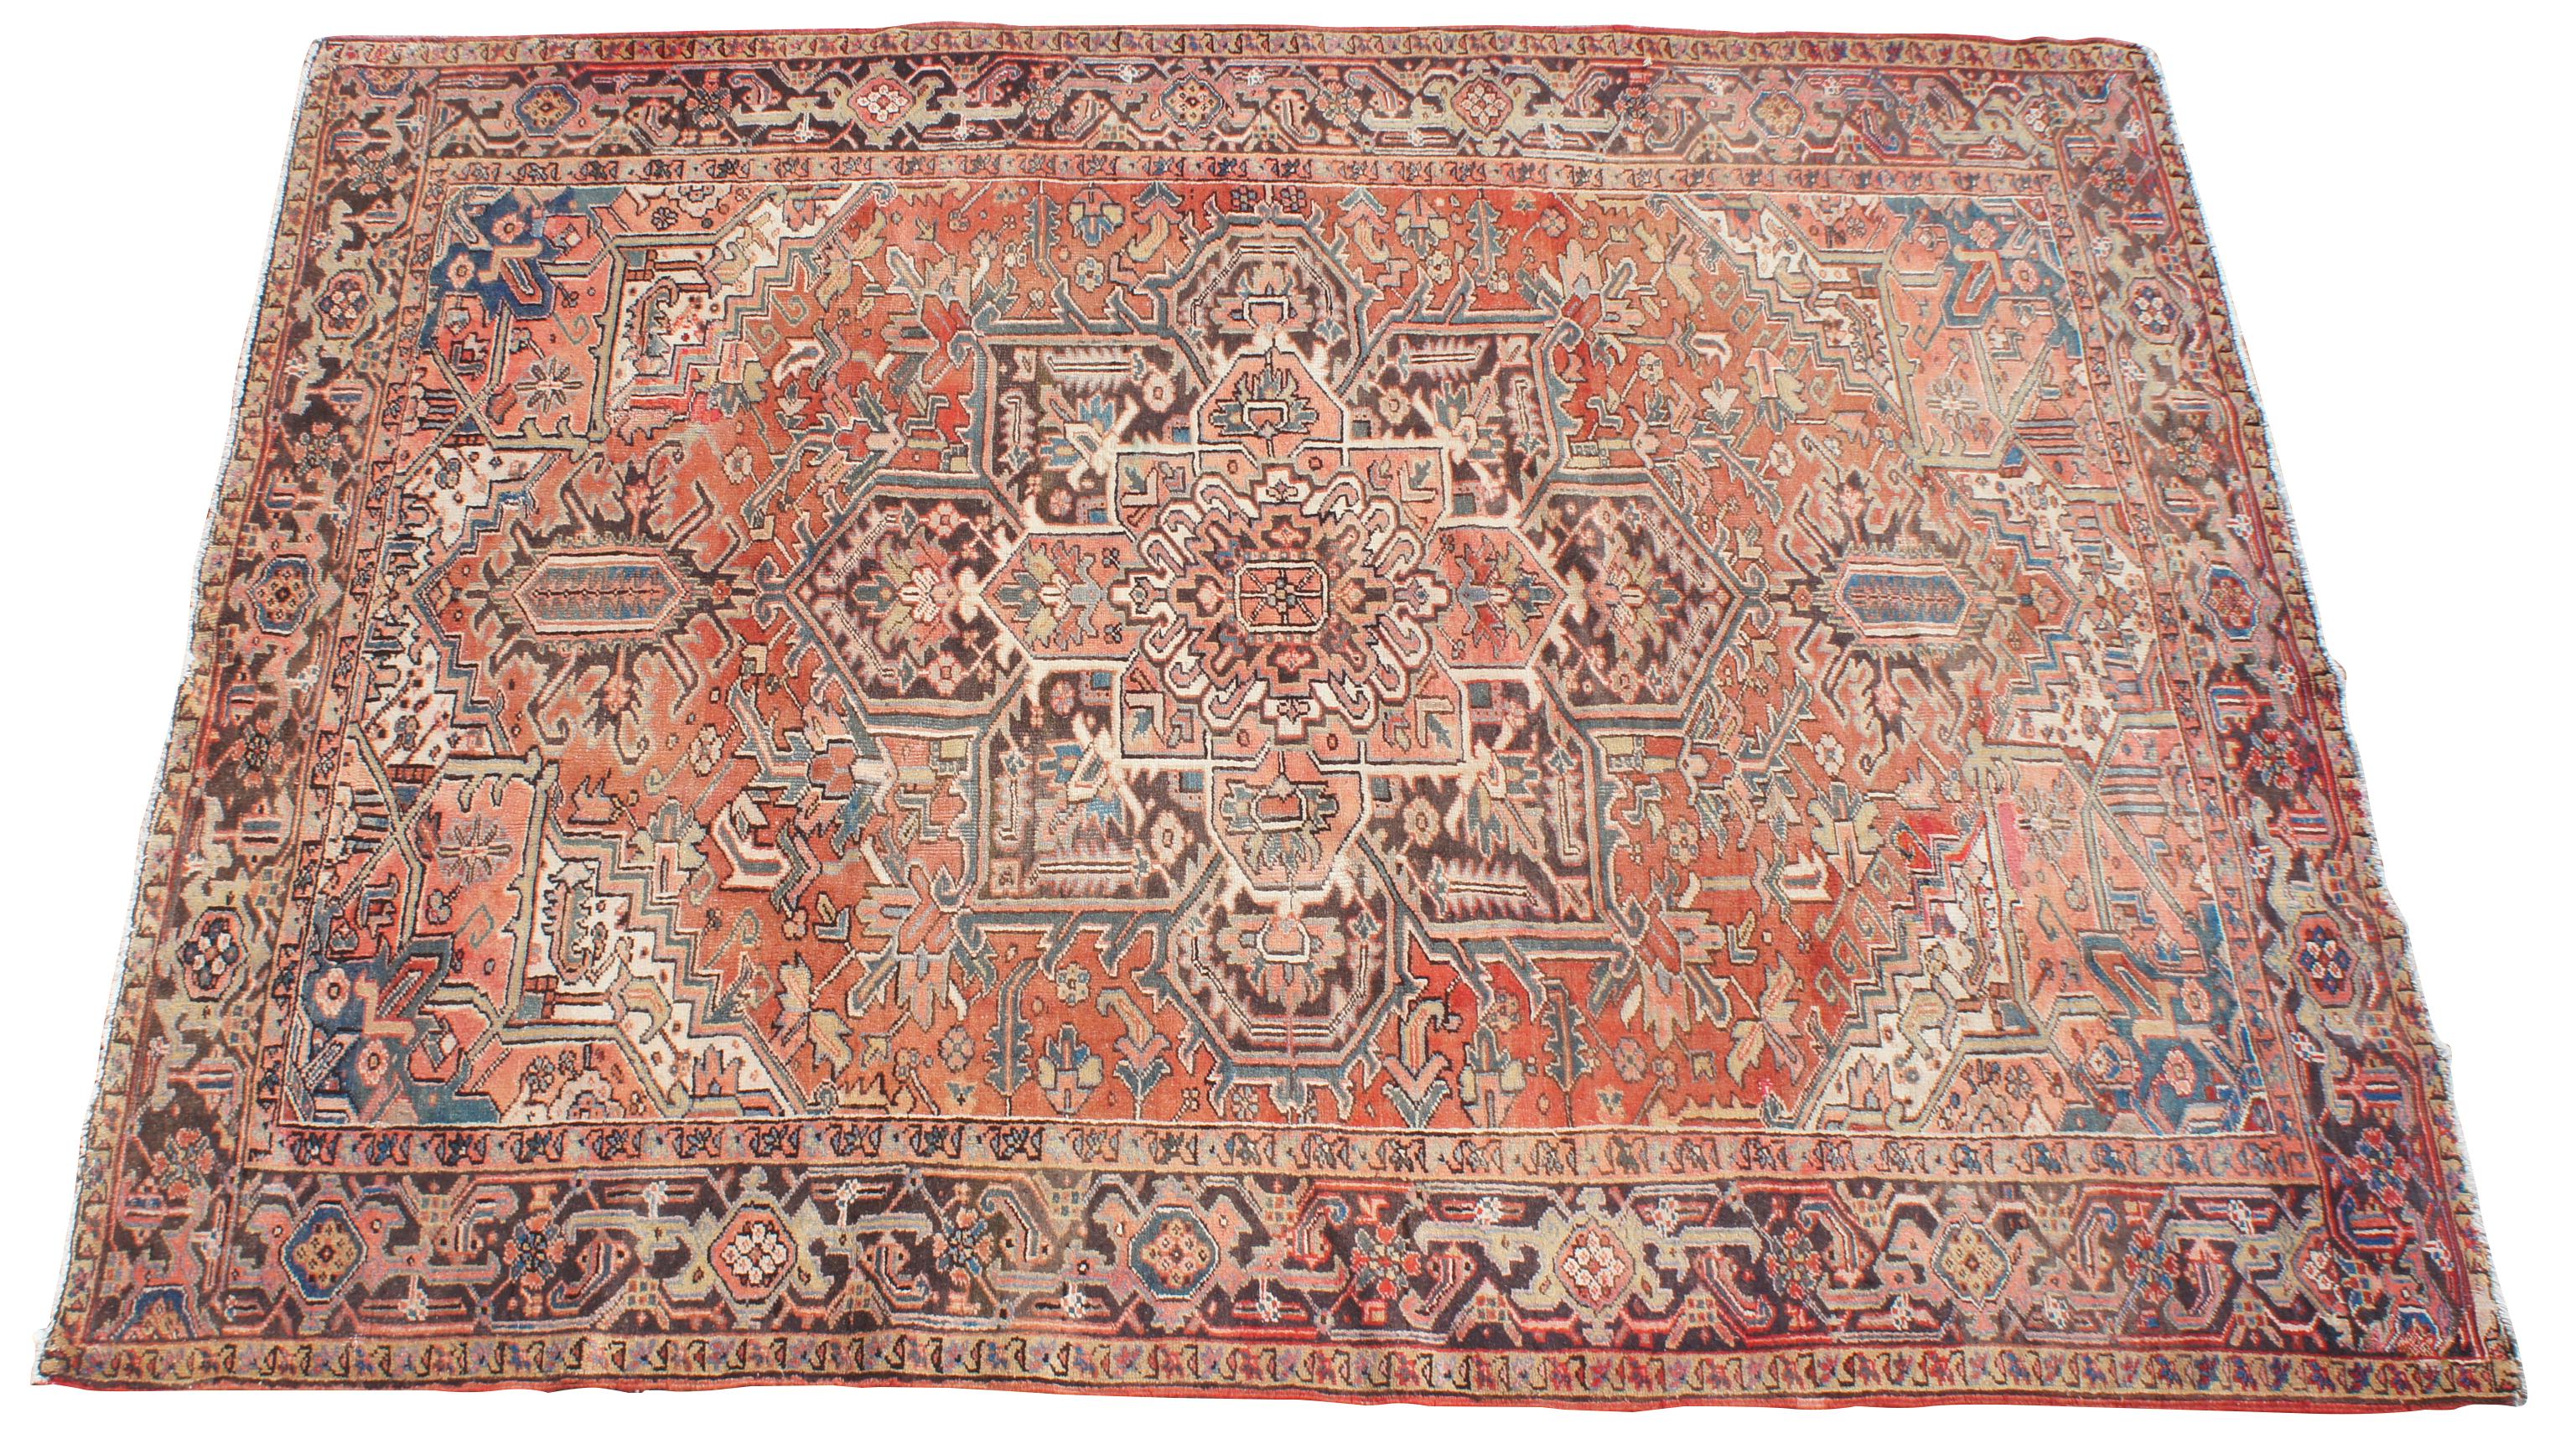 Antique hand knotted Oriental Heriz area rug made in Persia. Features a field of reds / pinks / peach with a floral throughout motif, geometric diamond shapes, and large central layered medallions. Multiple boarders encompass various intricate